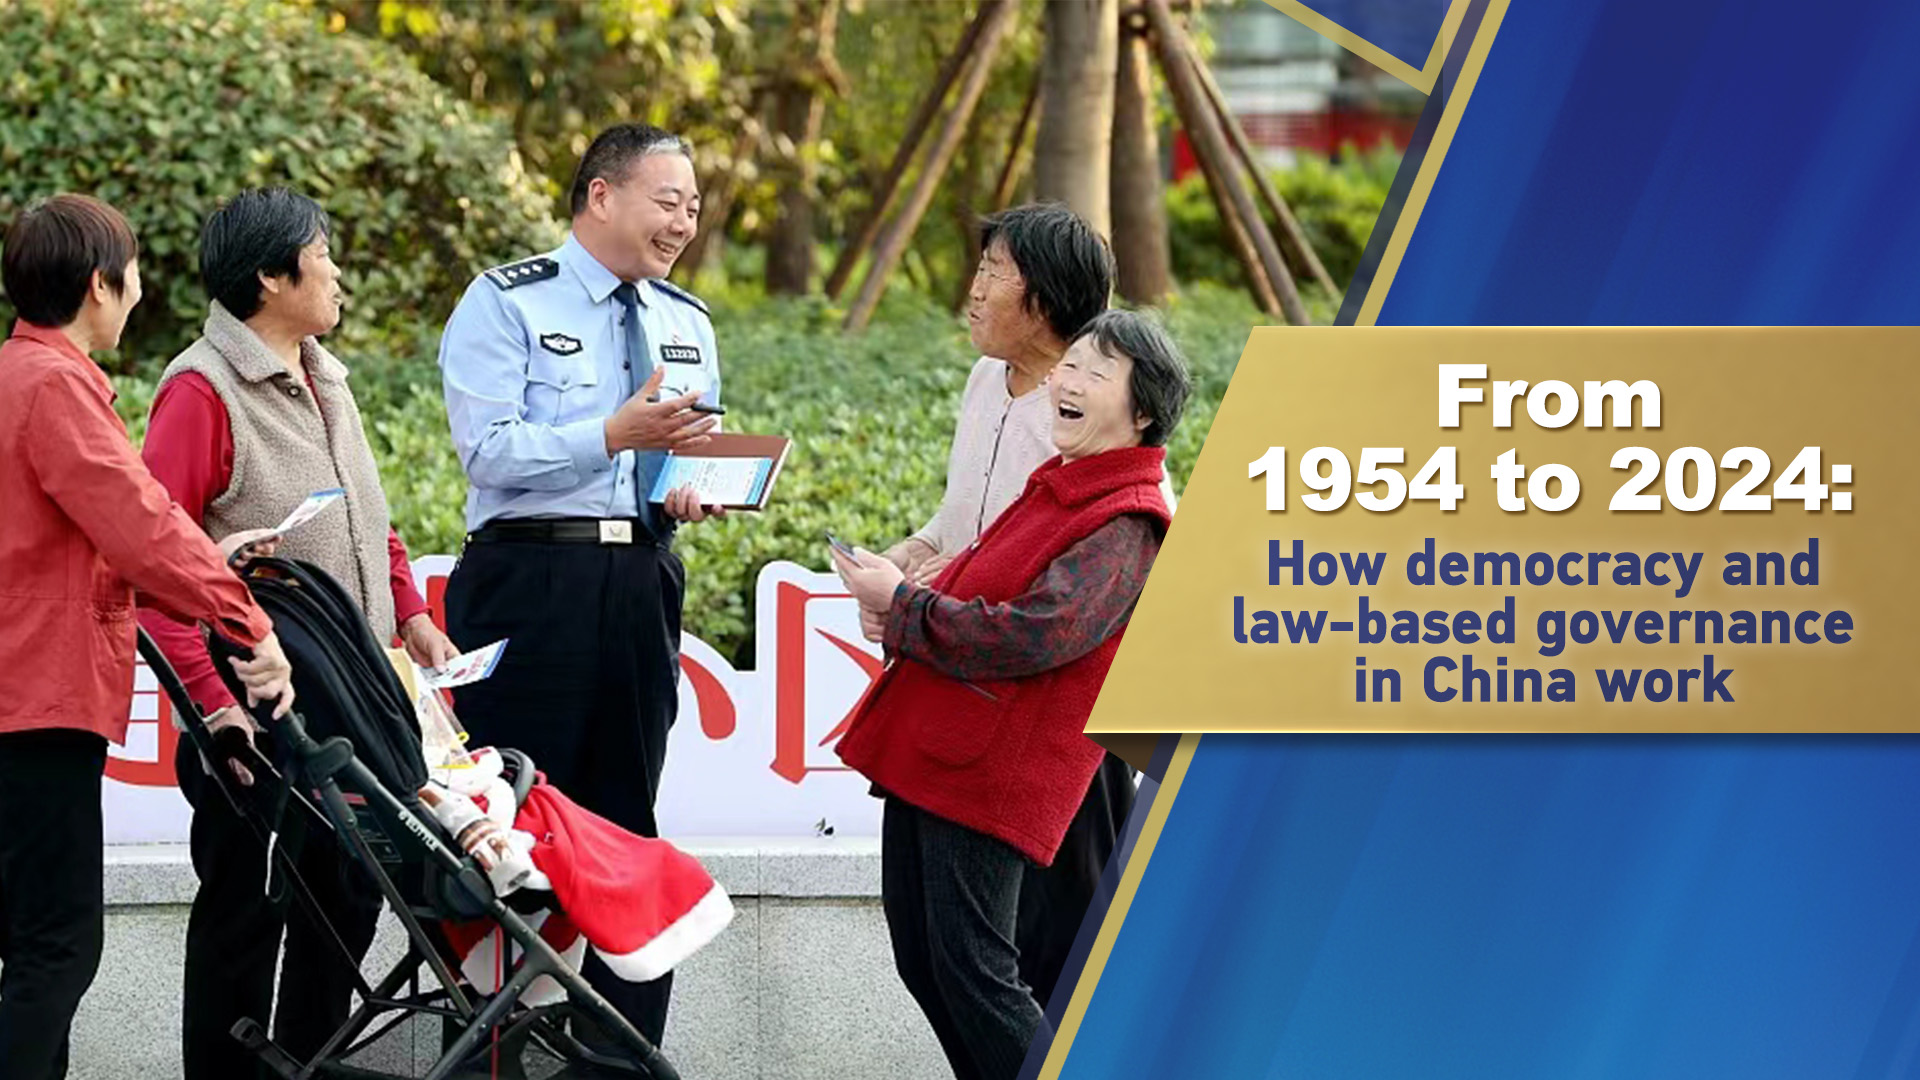 How democracy and law-based governance in China work